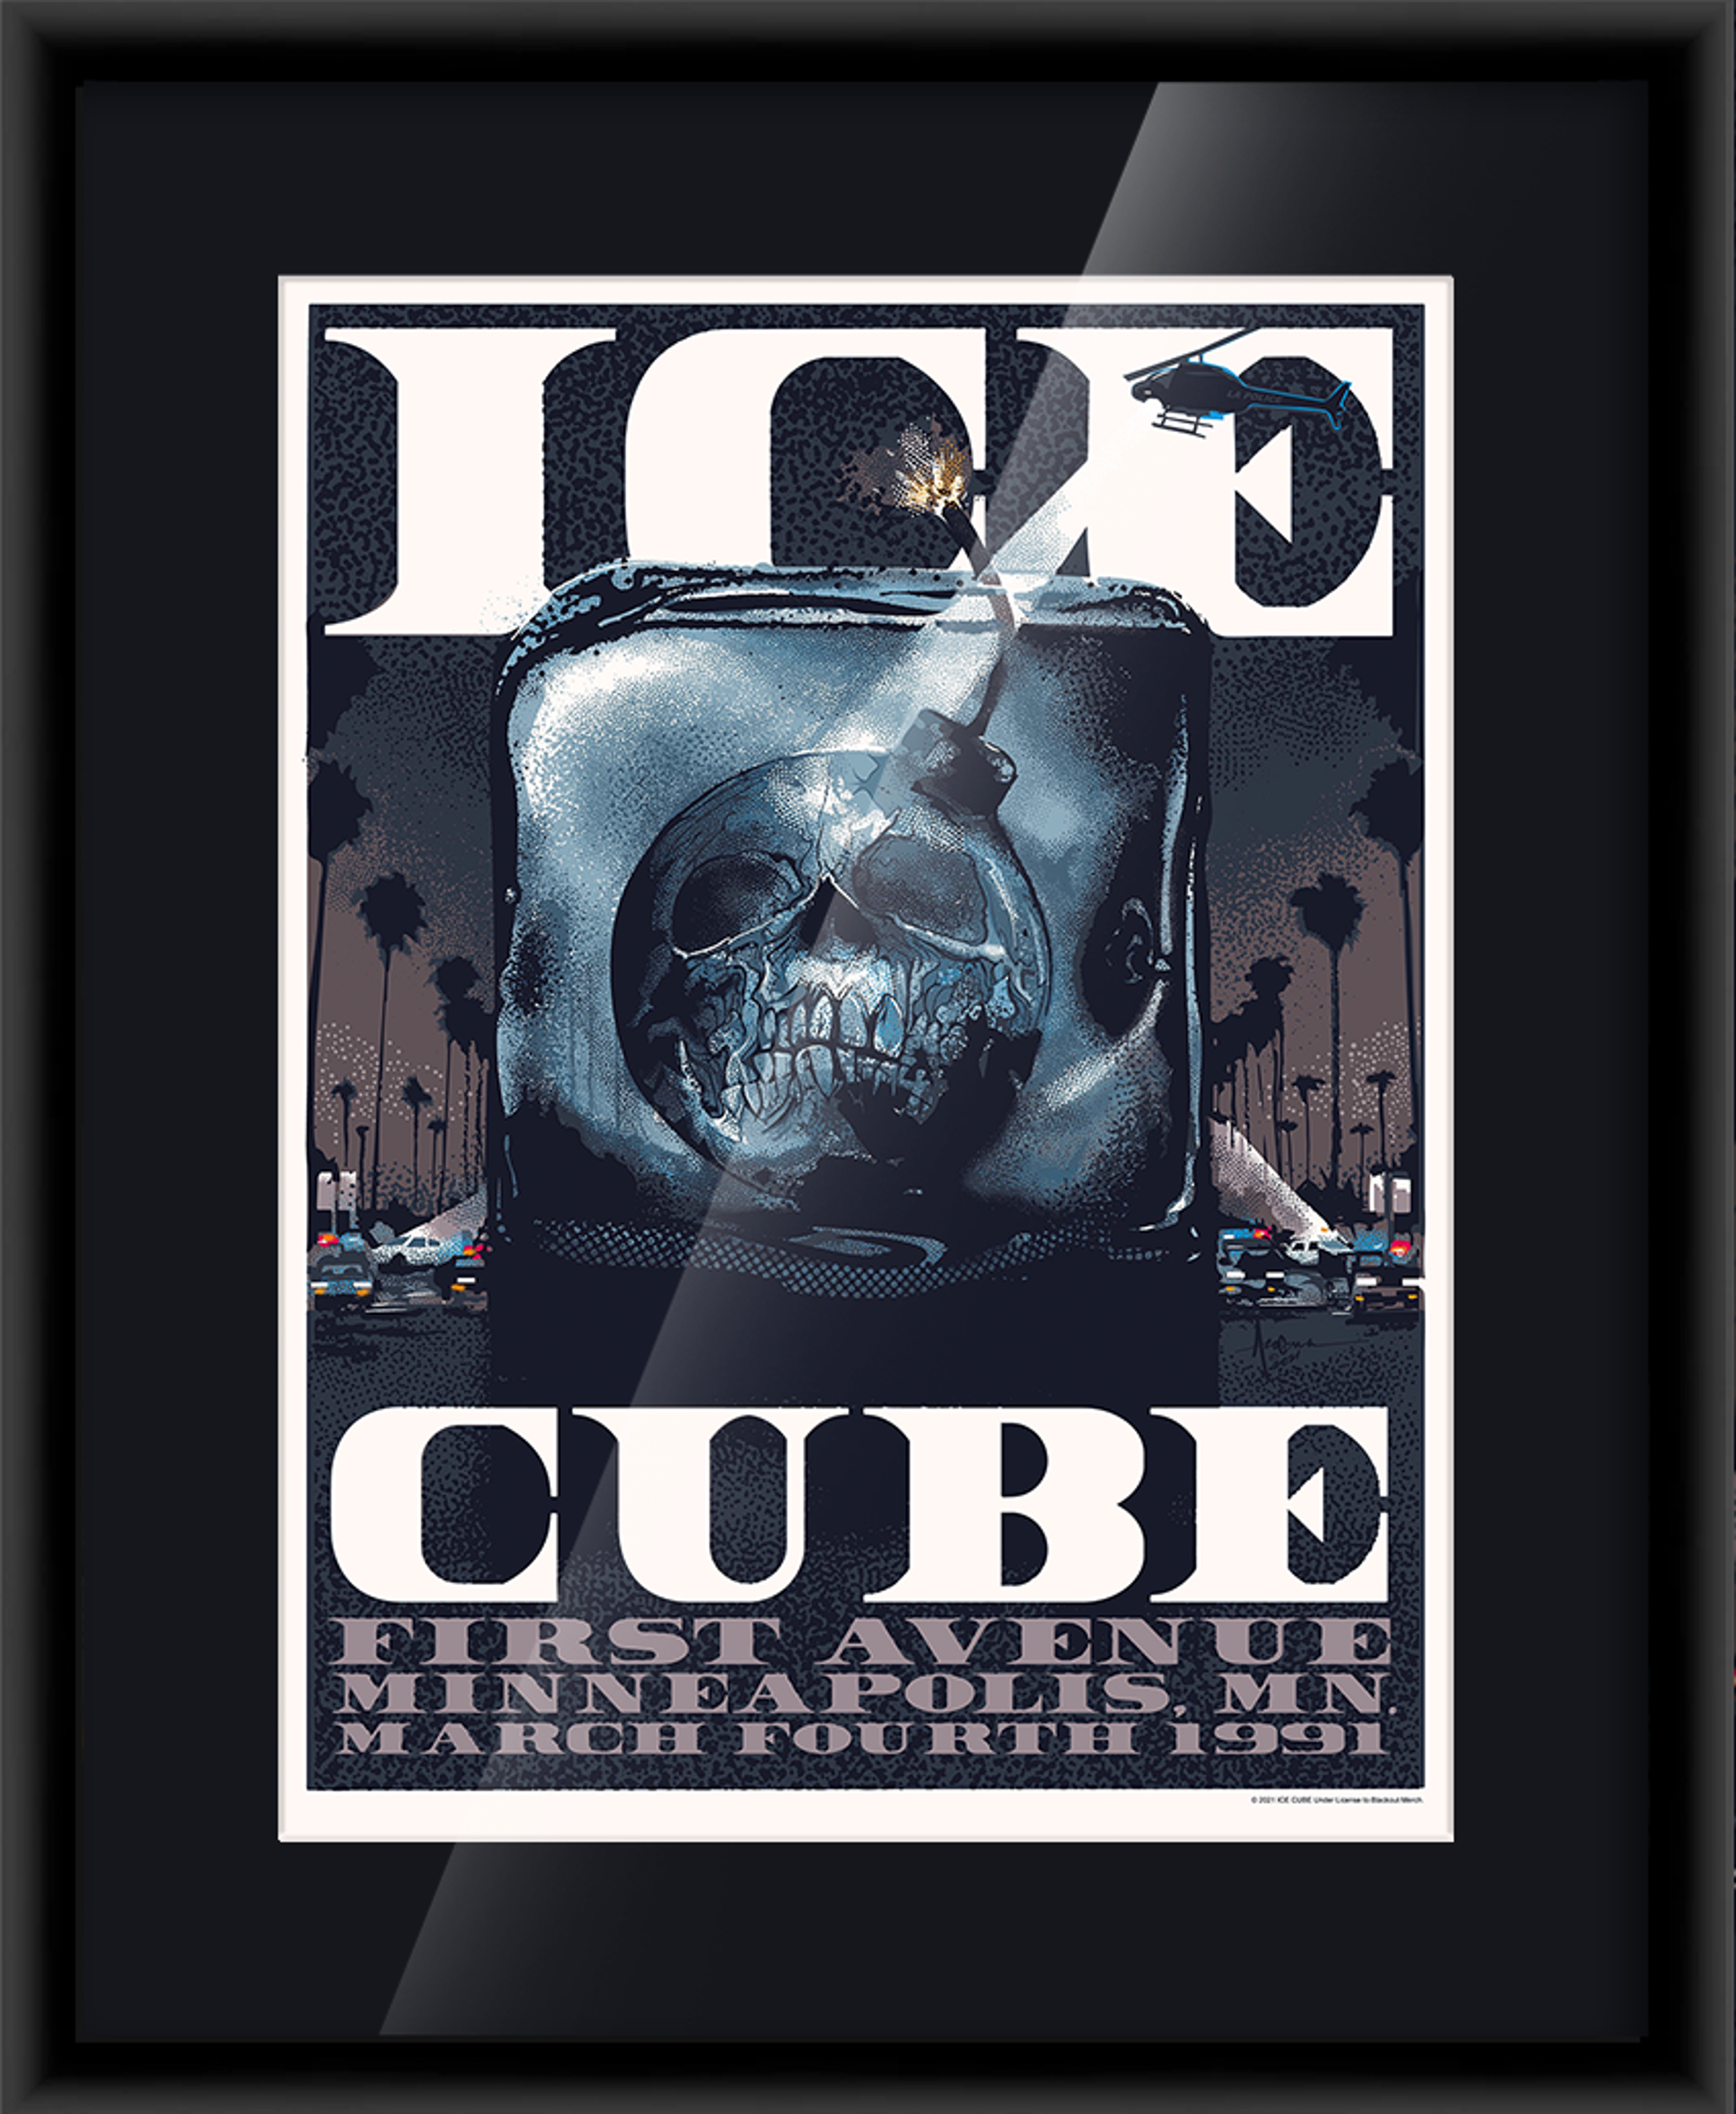 Alternate View 1 of Ice Cube "THE BOMB" Minneapolis 1991 (Foil Edition)